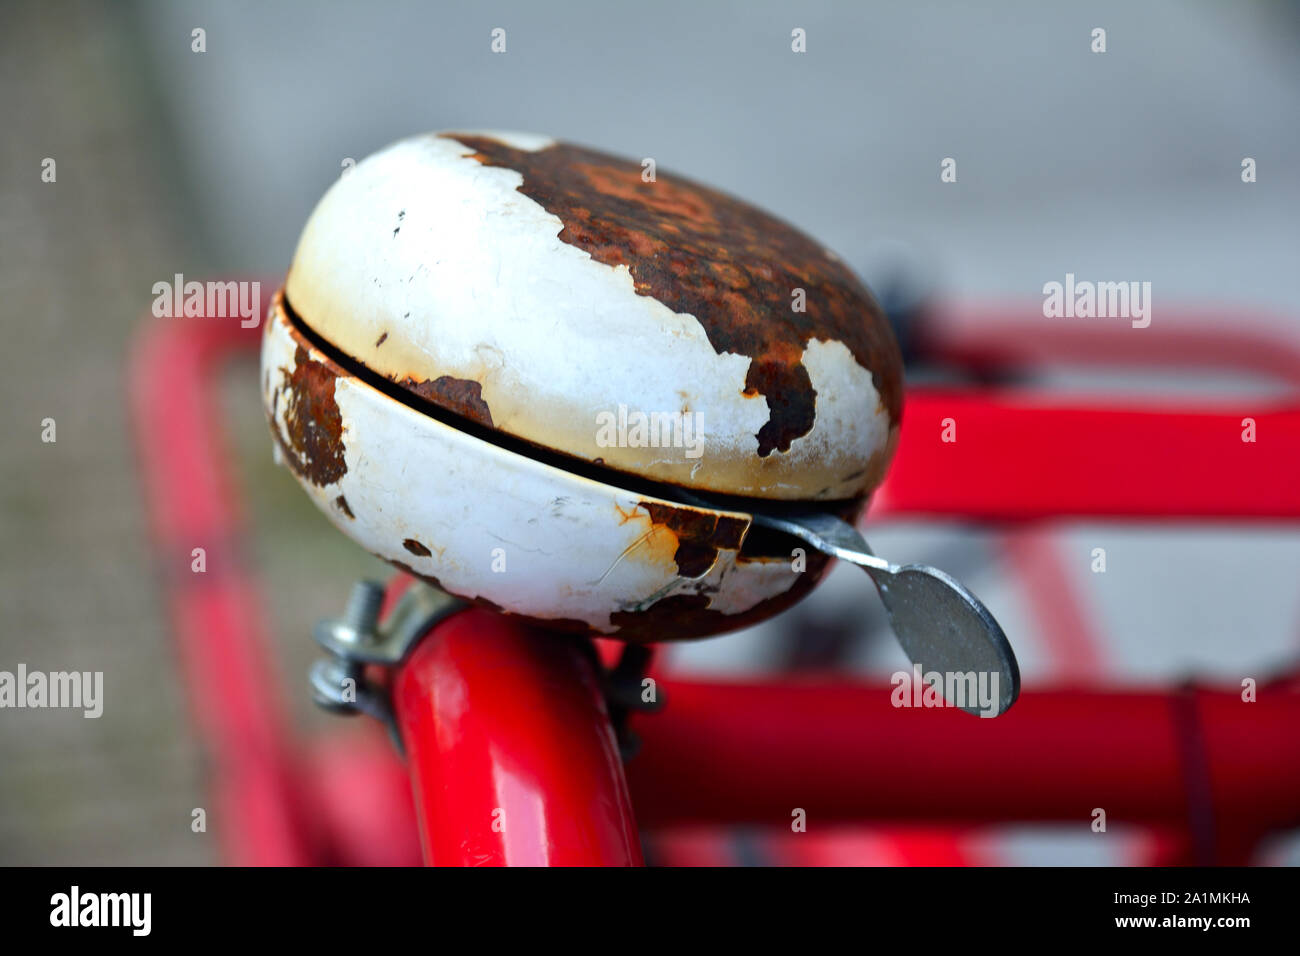 A closeup photo of a rusty and well worn old bicycle bell on a red bike frame Stock Photo